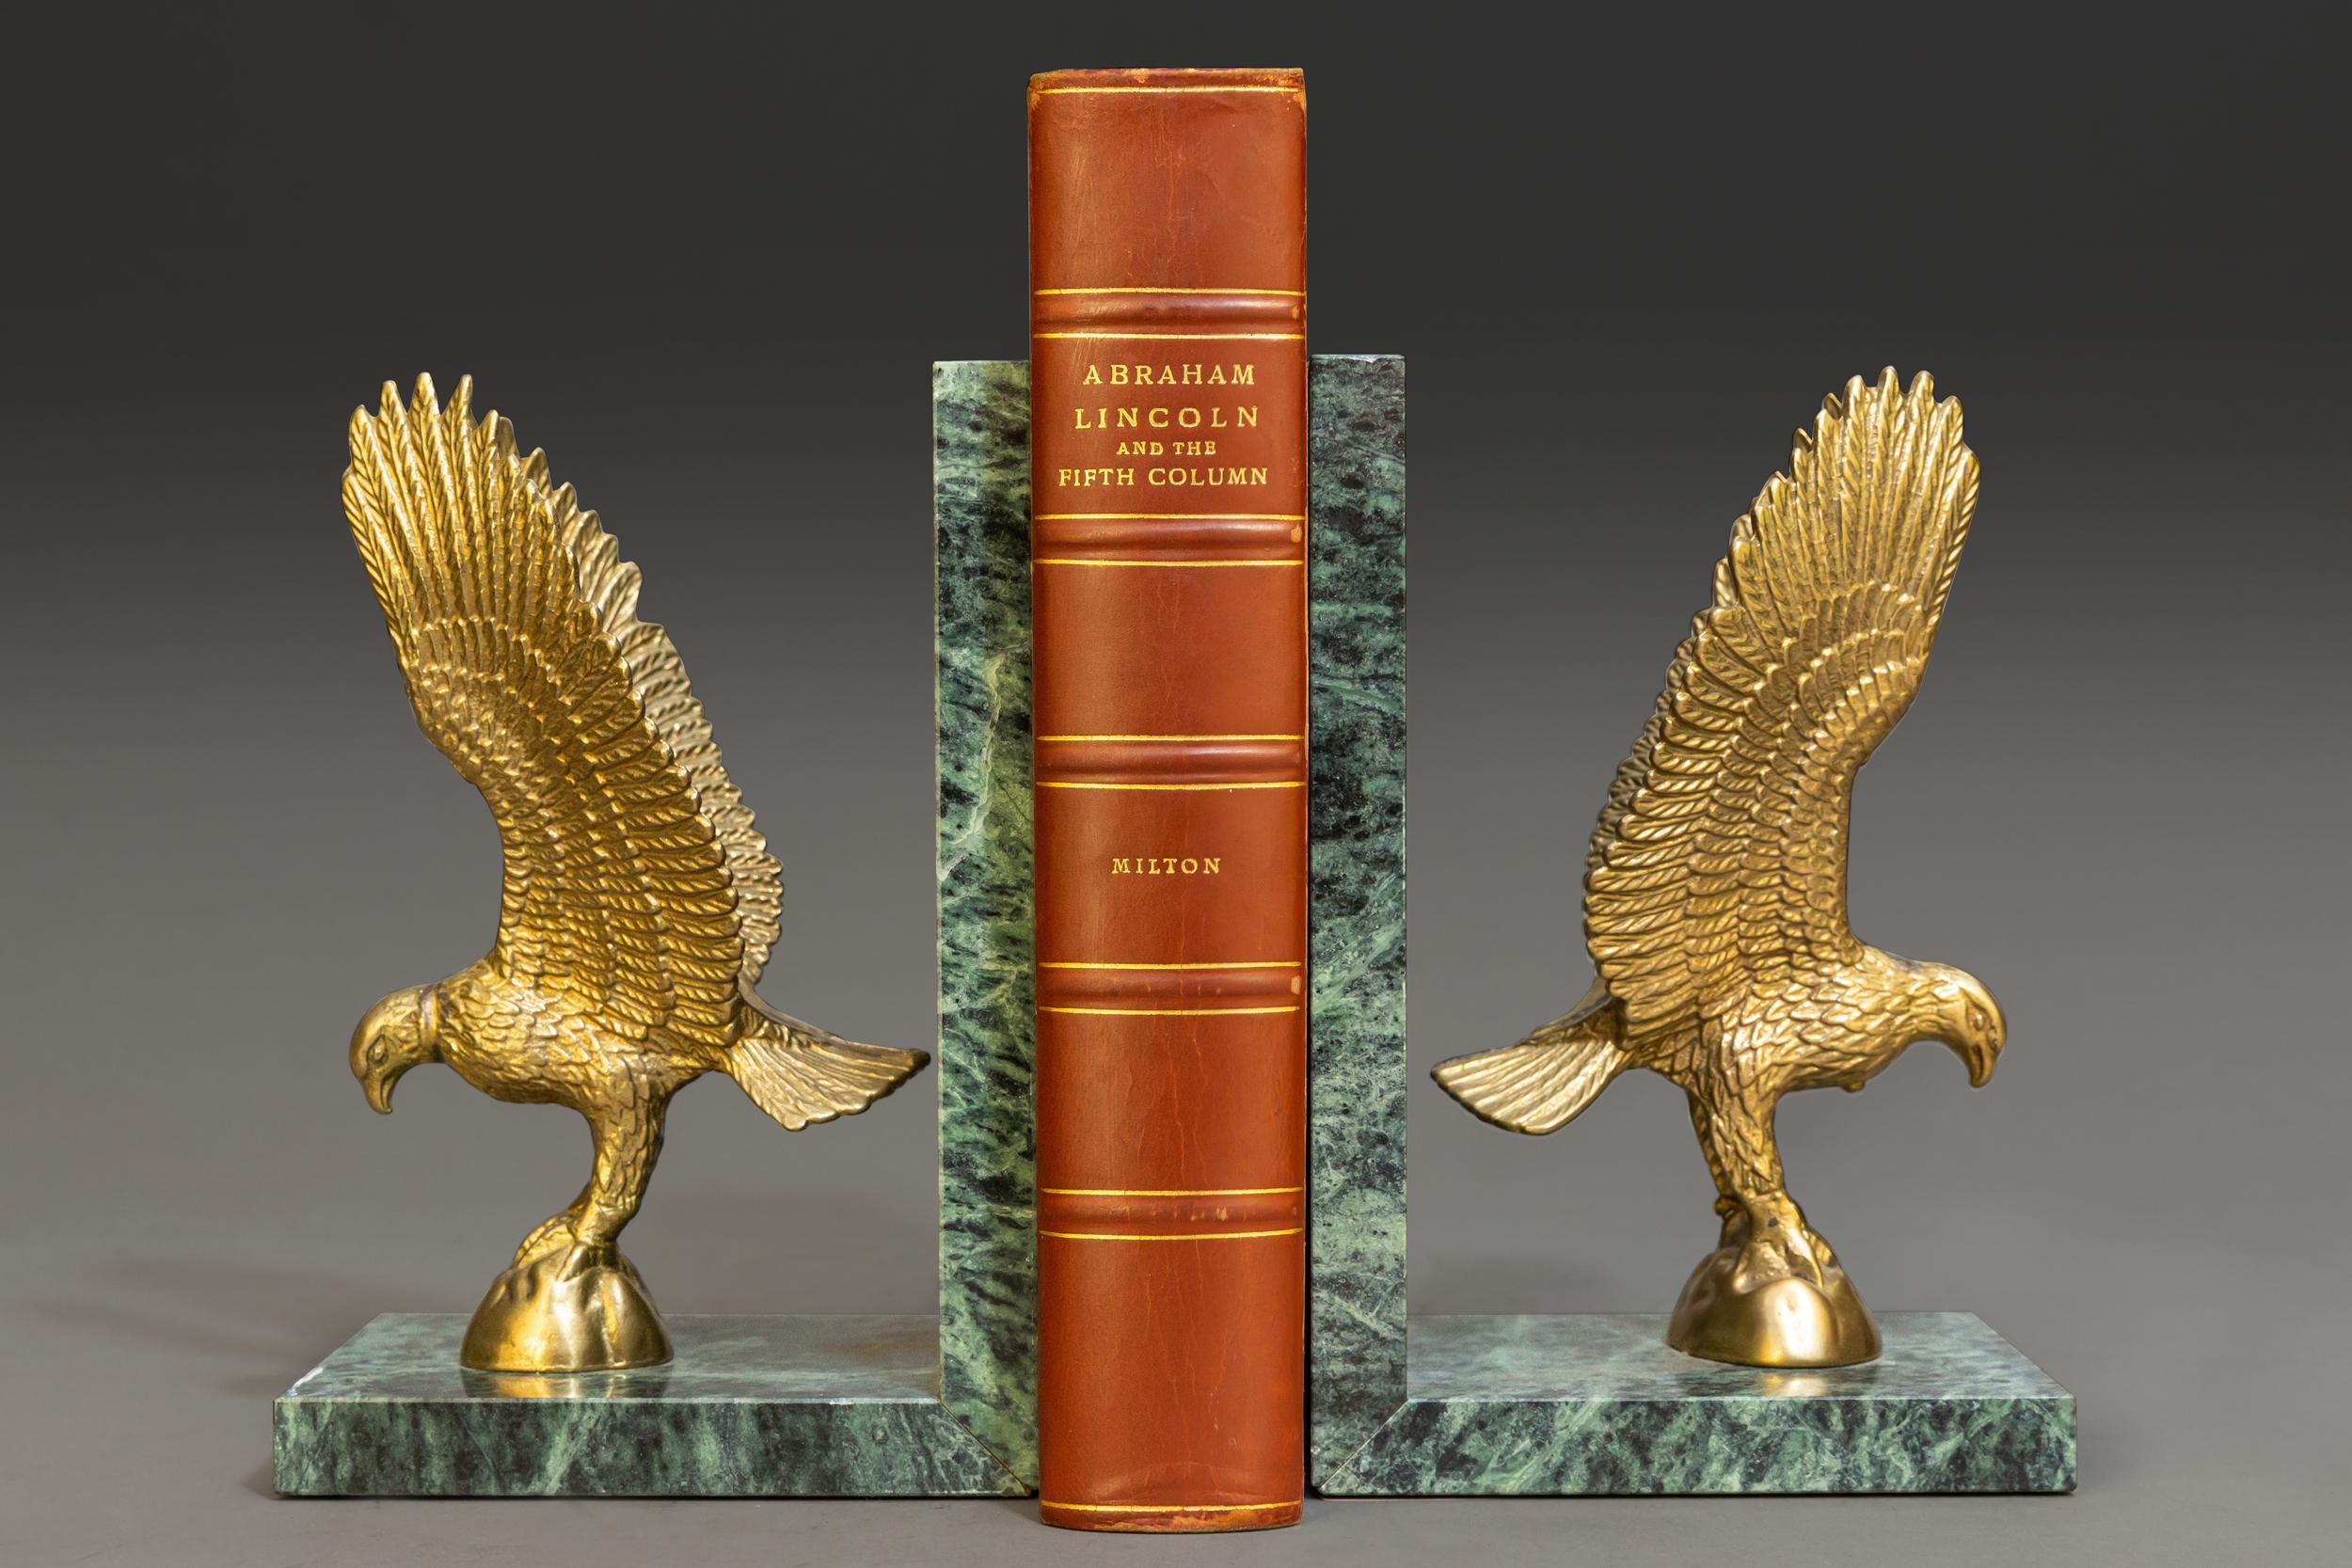 1 volume. 

Inscribed and signed by The Author.
Bound in 3/4 tan calf, cloth boards, top edges gilt, raised bands, gilt panels.

Published: New York: The Vanguard Press, 1942. First Edition. 

Measures: H 9 1/4”, D 6 1/2”, W 1 3/4”.